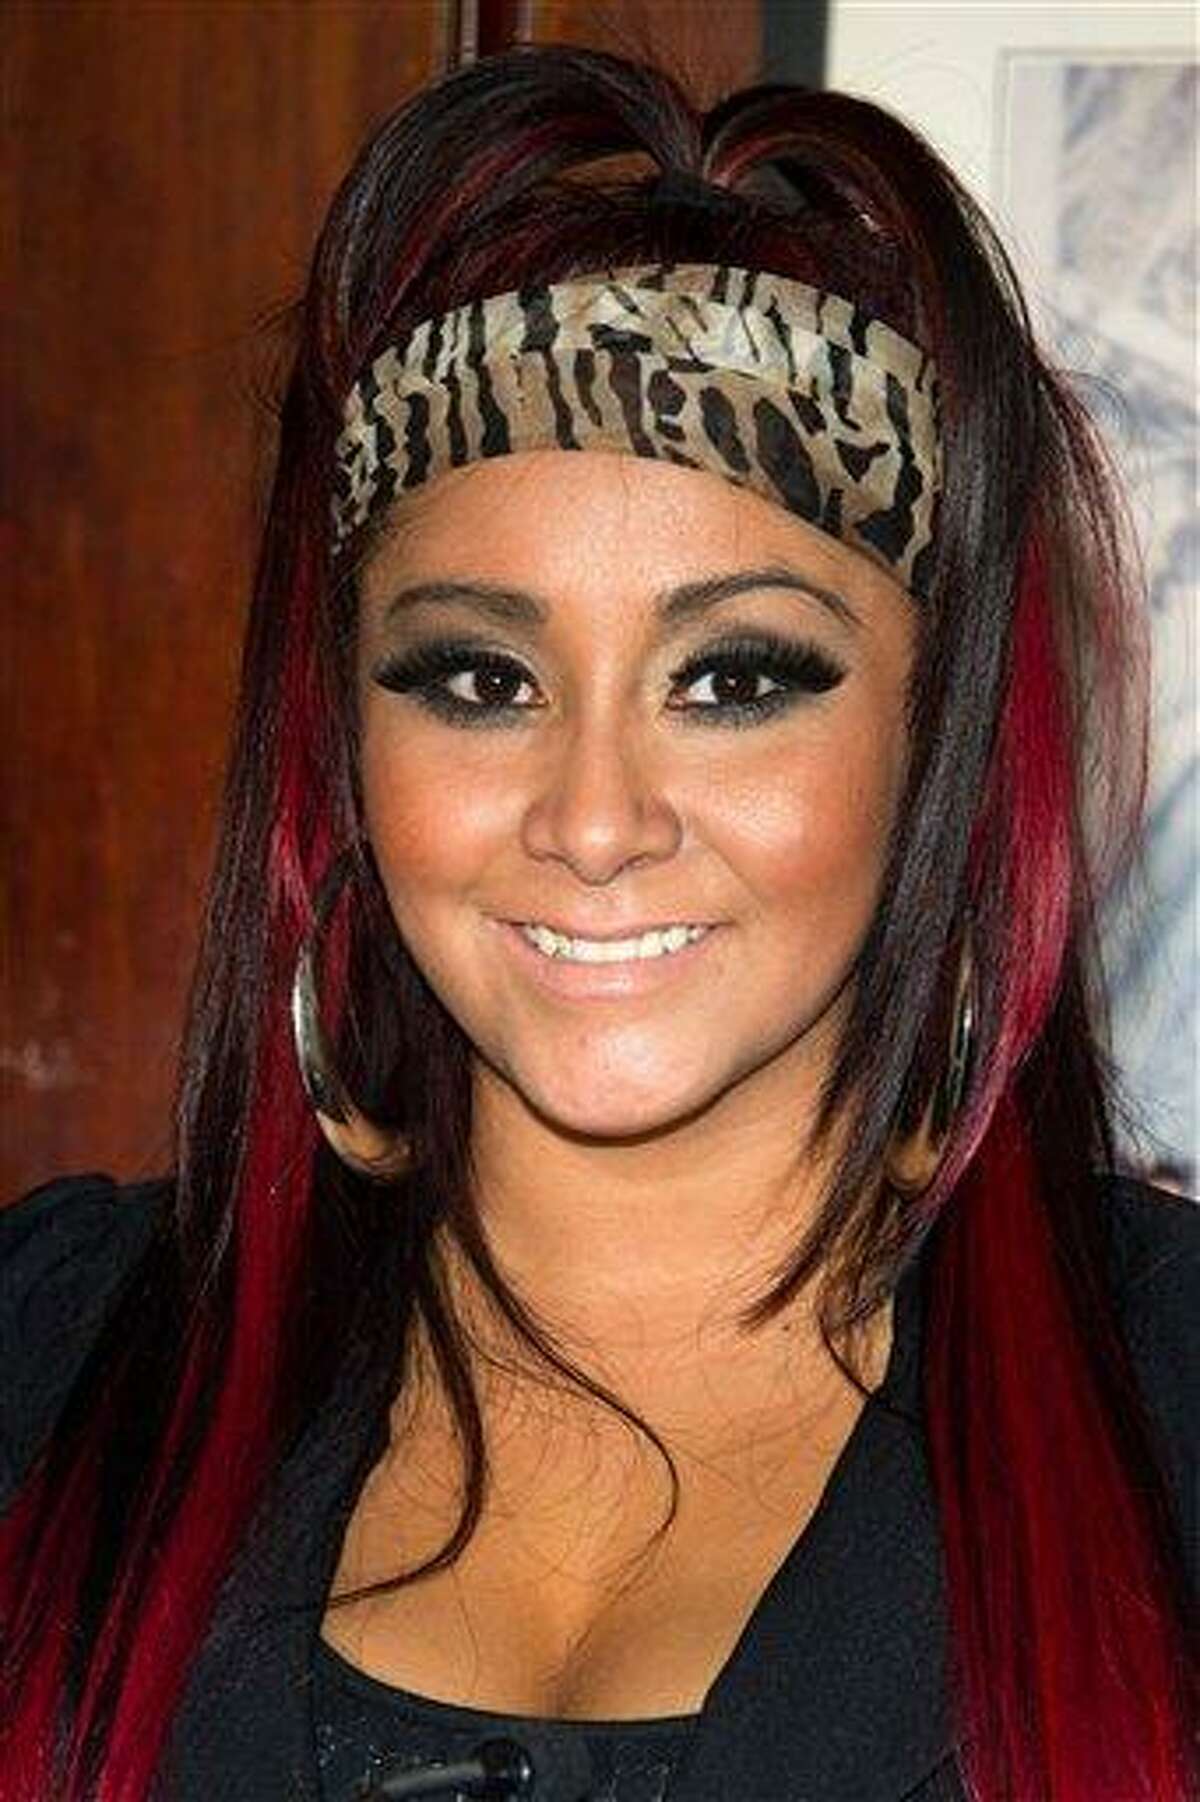 Jersey Shore' star Snooki gives birth to baby boy